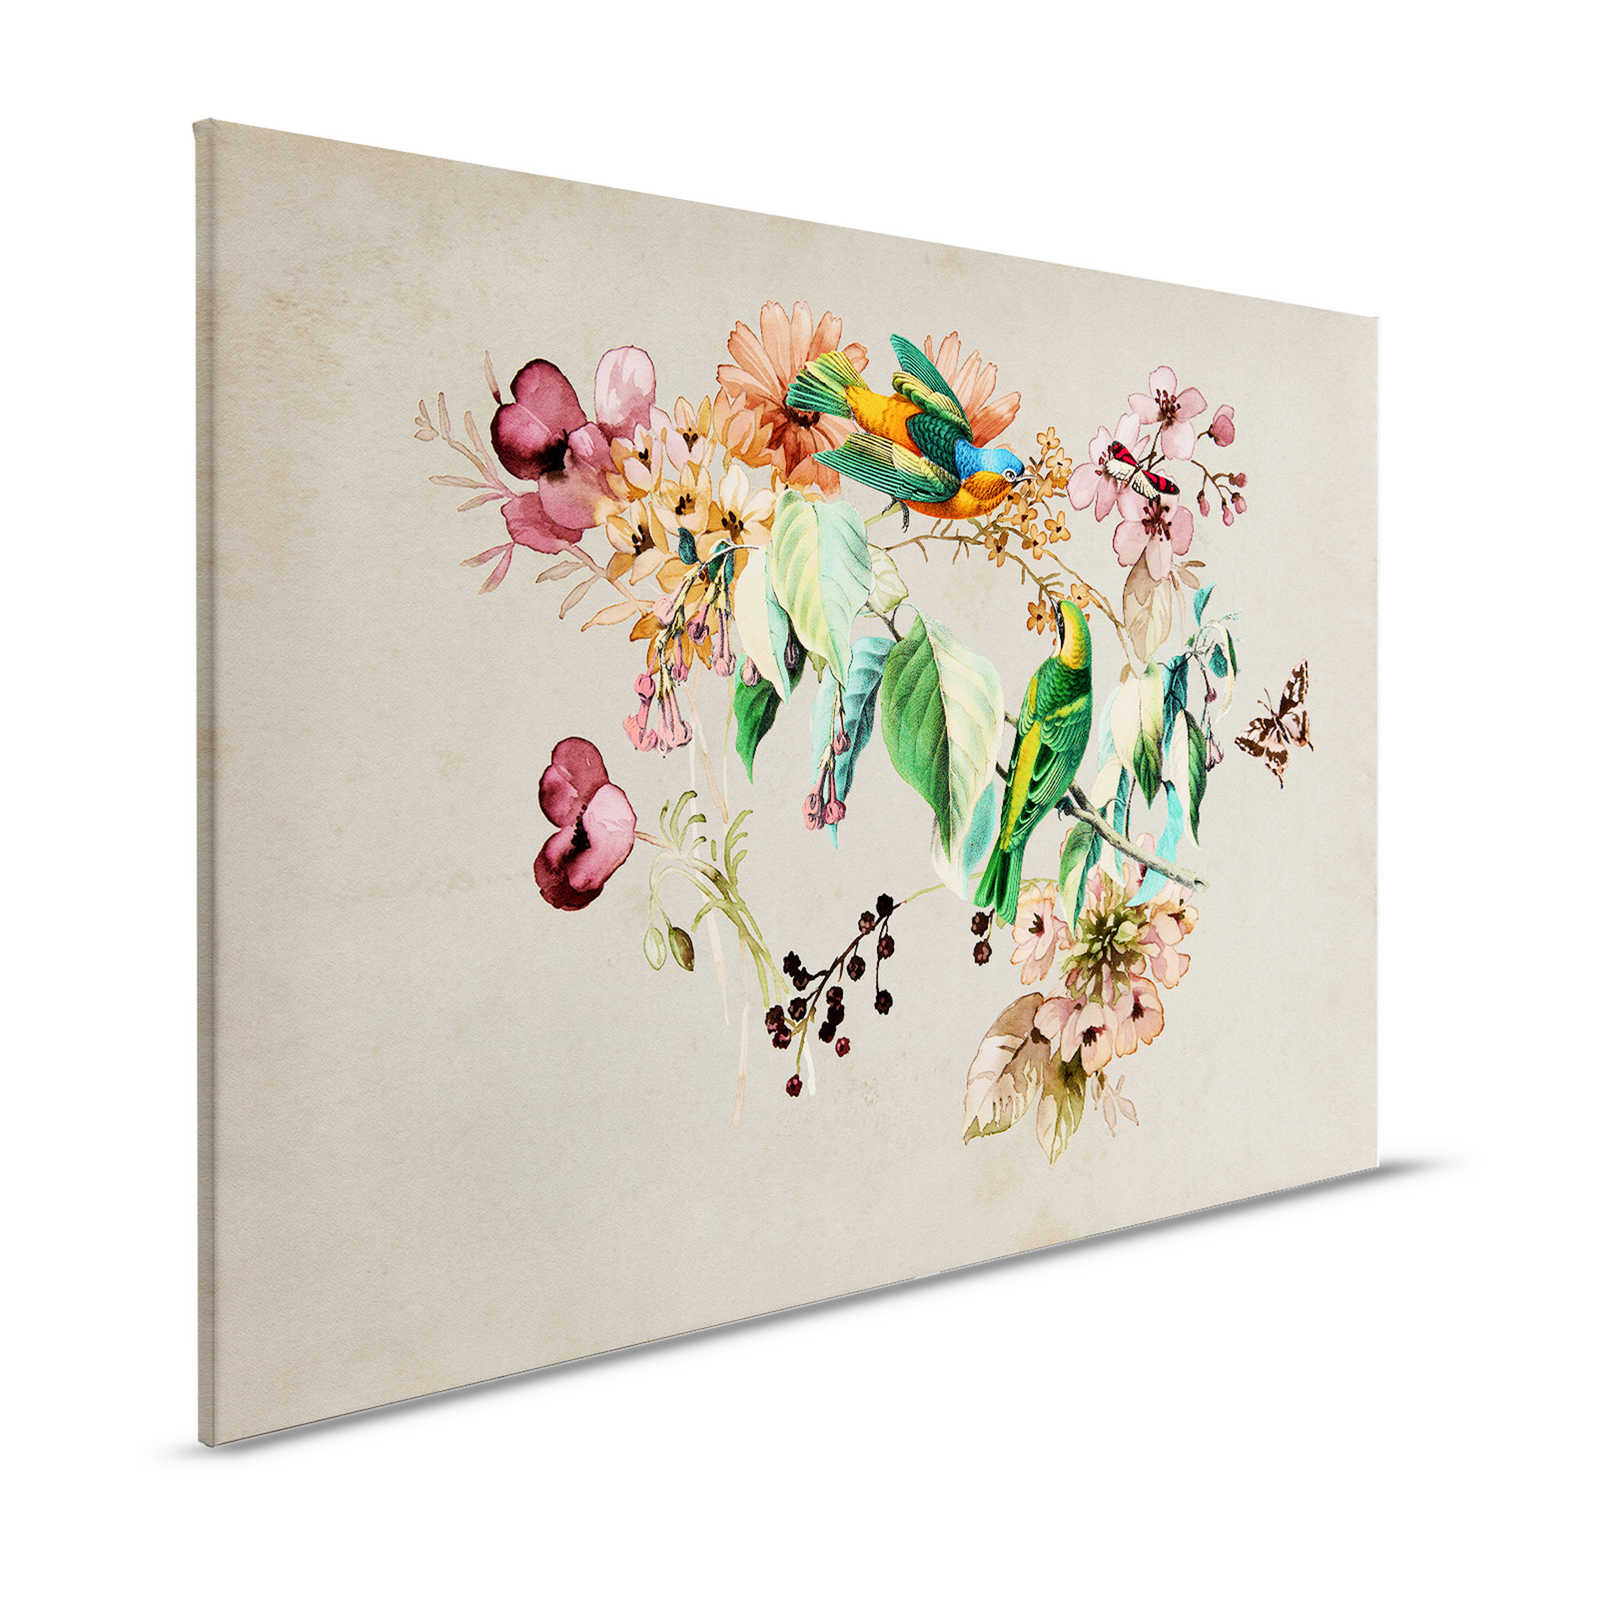 Love Nest 1 - Canvas painting with watercolour flowers & colourful birds - 1.20 m x 0.80 m
